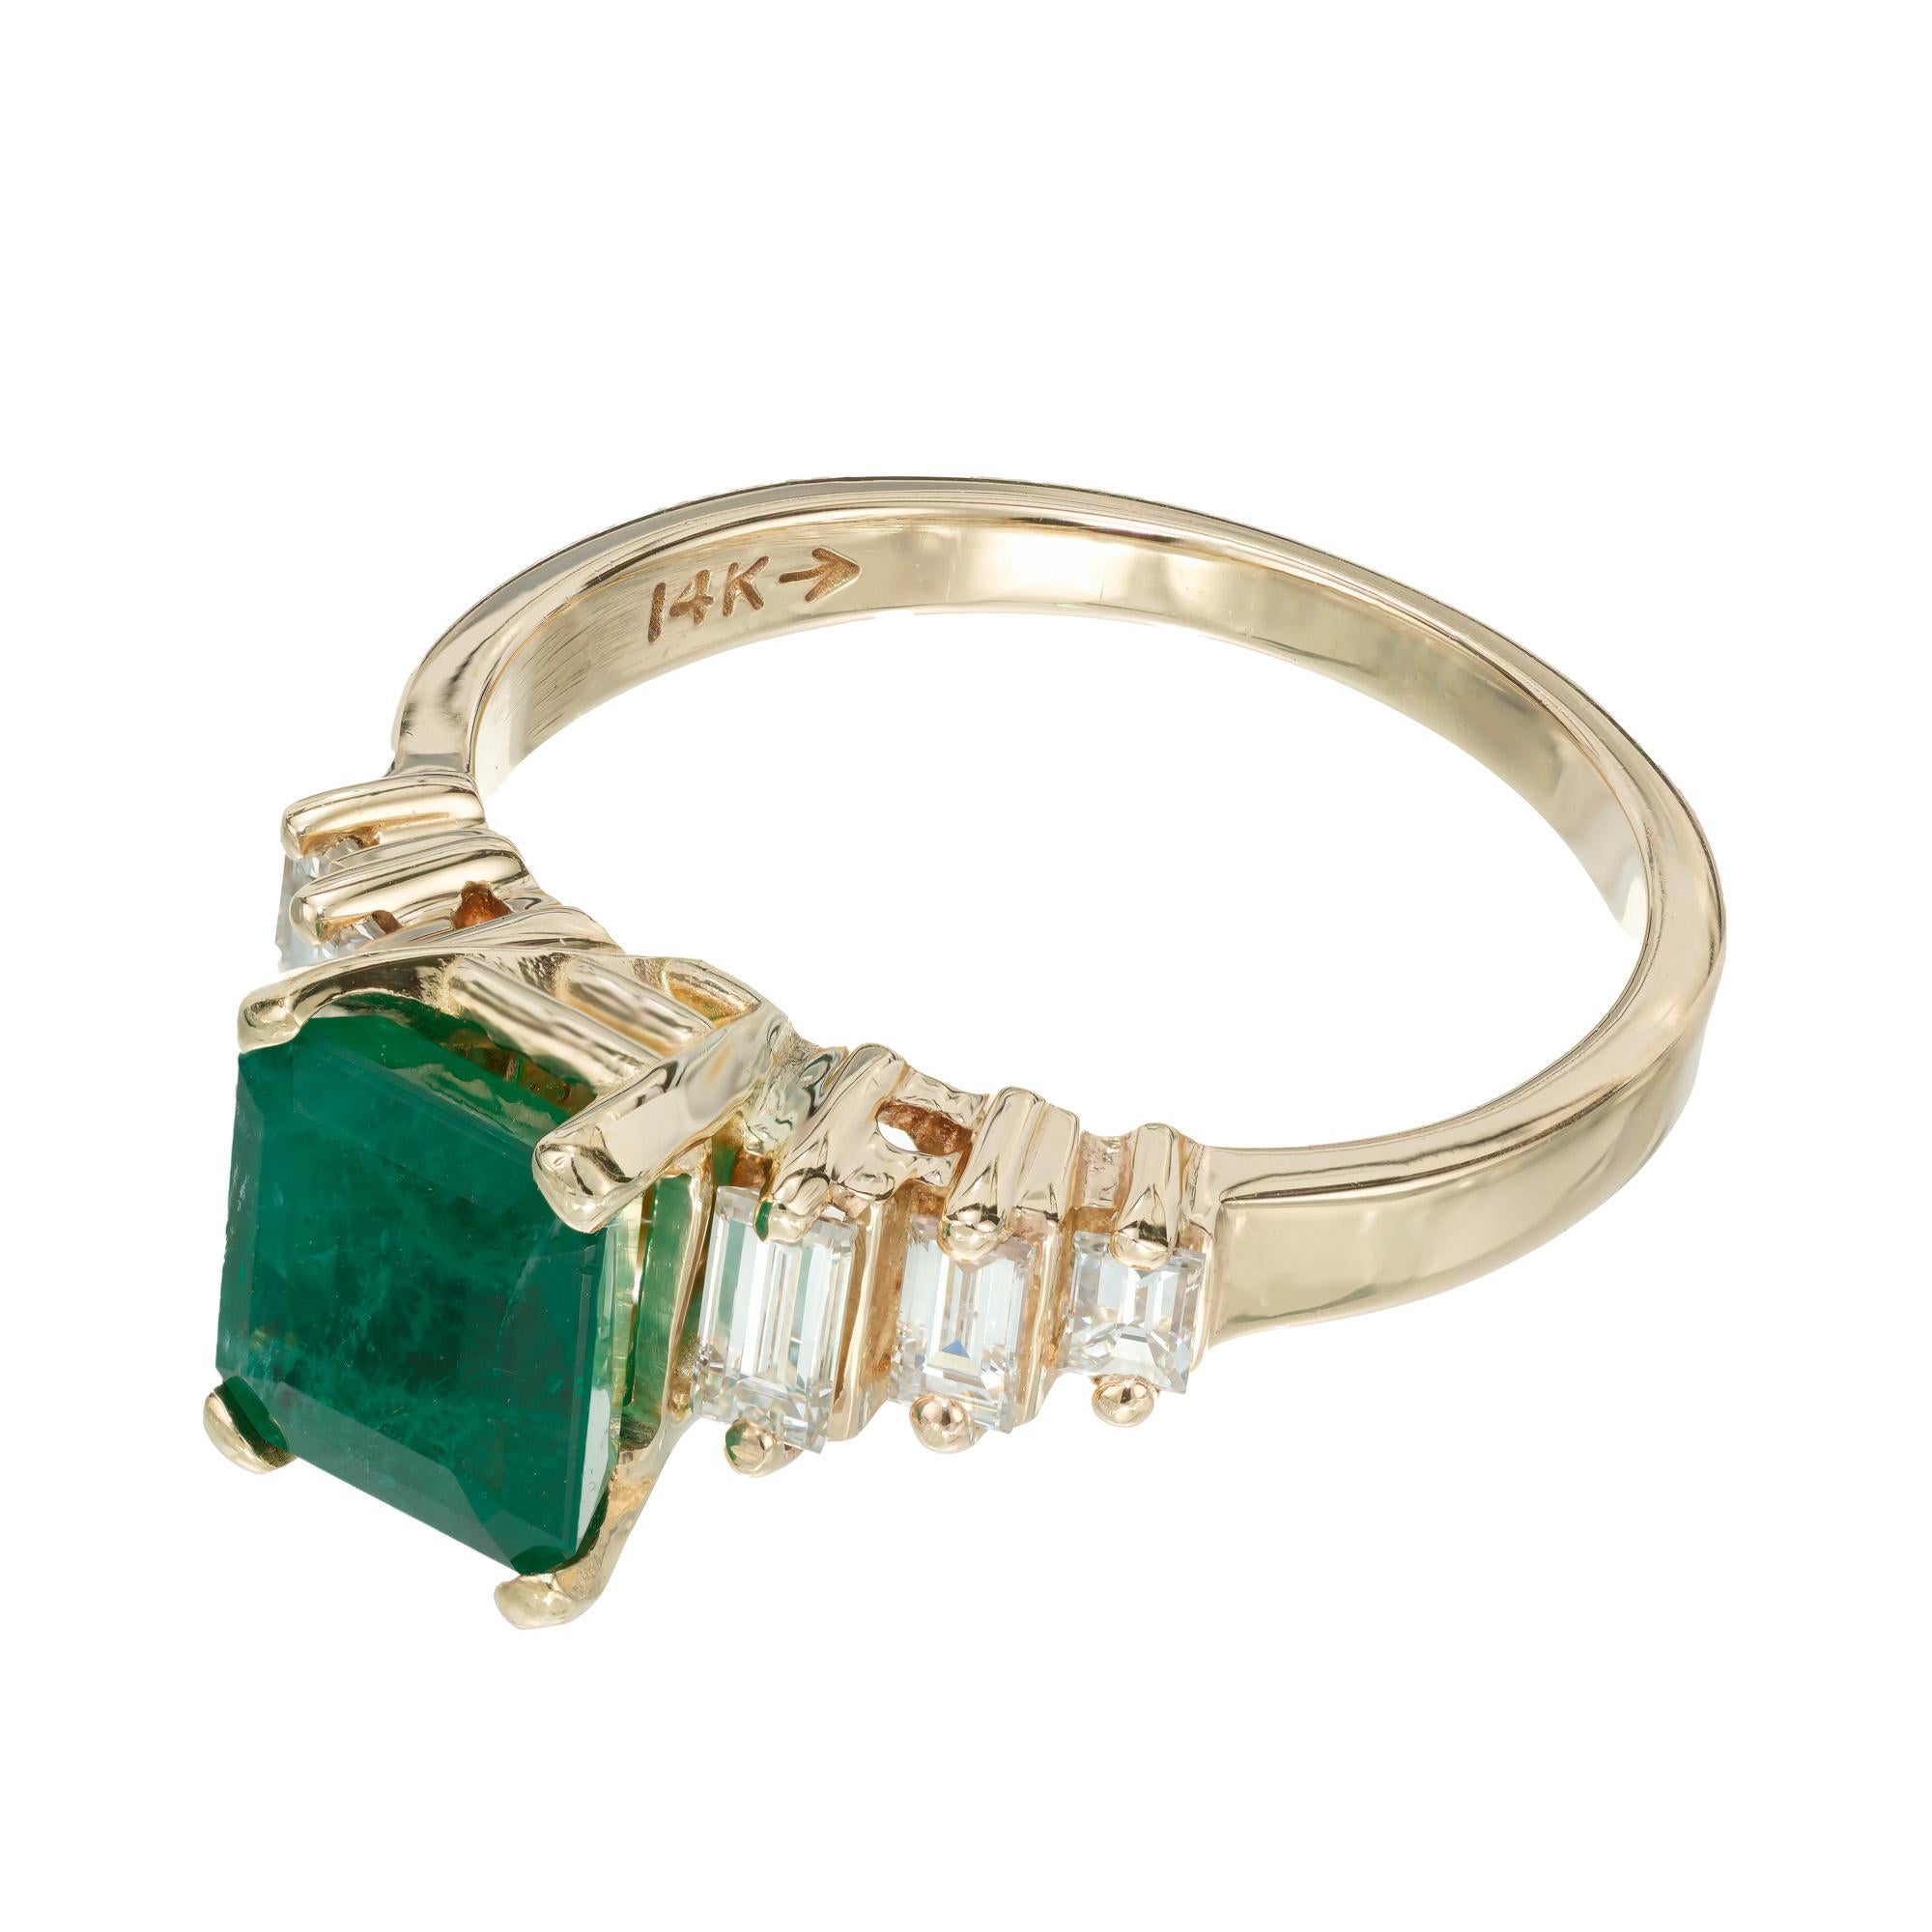 Classic 1960’s vintage rich green Emerald cut Emerald and diamond engagement ring. GIA certified 1.50ct octagonal step cut center emerald set in a 14k yellow gold setting with 6 baguette cut diamonds. 

1 octagonal step cut green Emerald, approx.